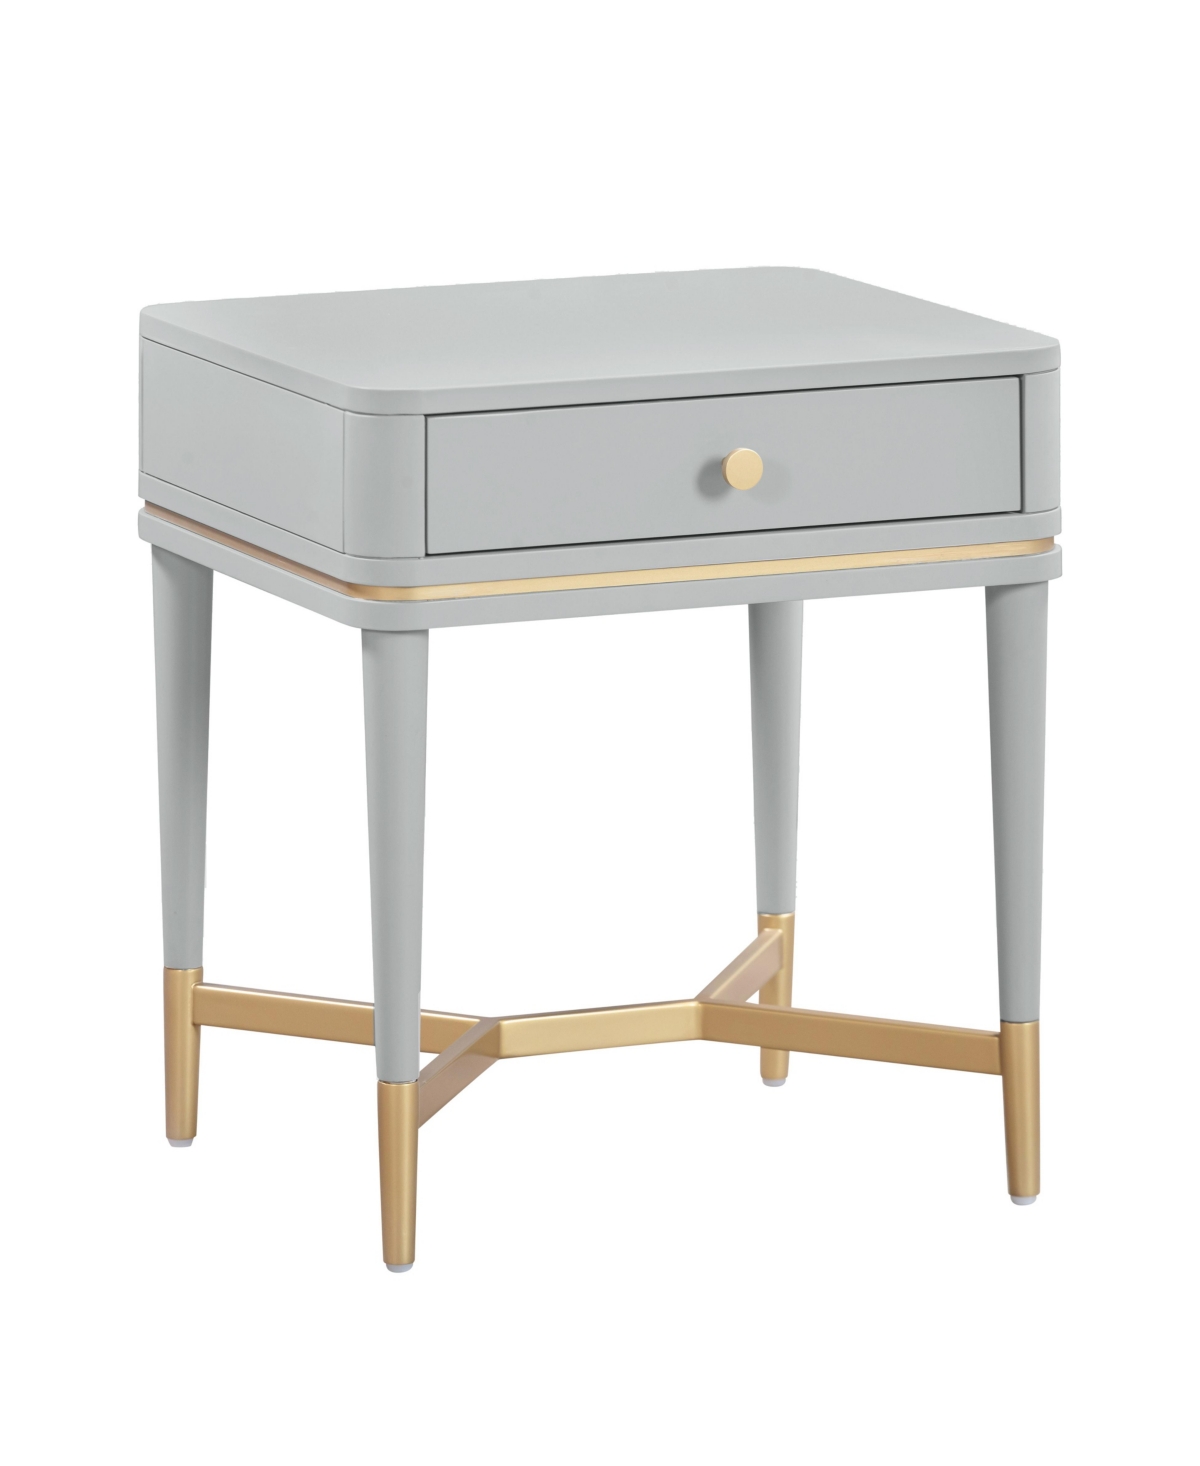 Tov Furniture 1 Piece Wood 1 Drawer Nightstand In Gray